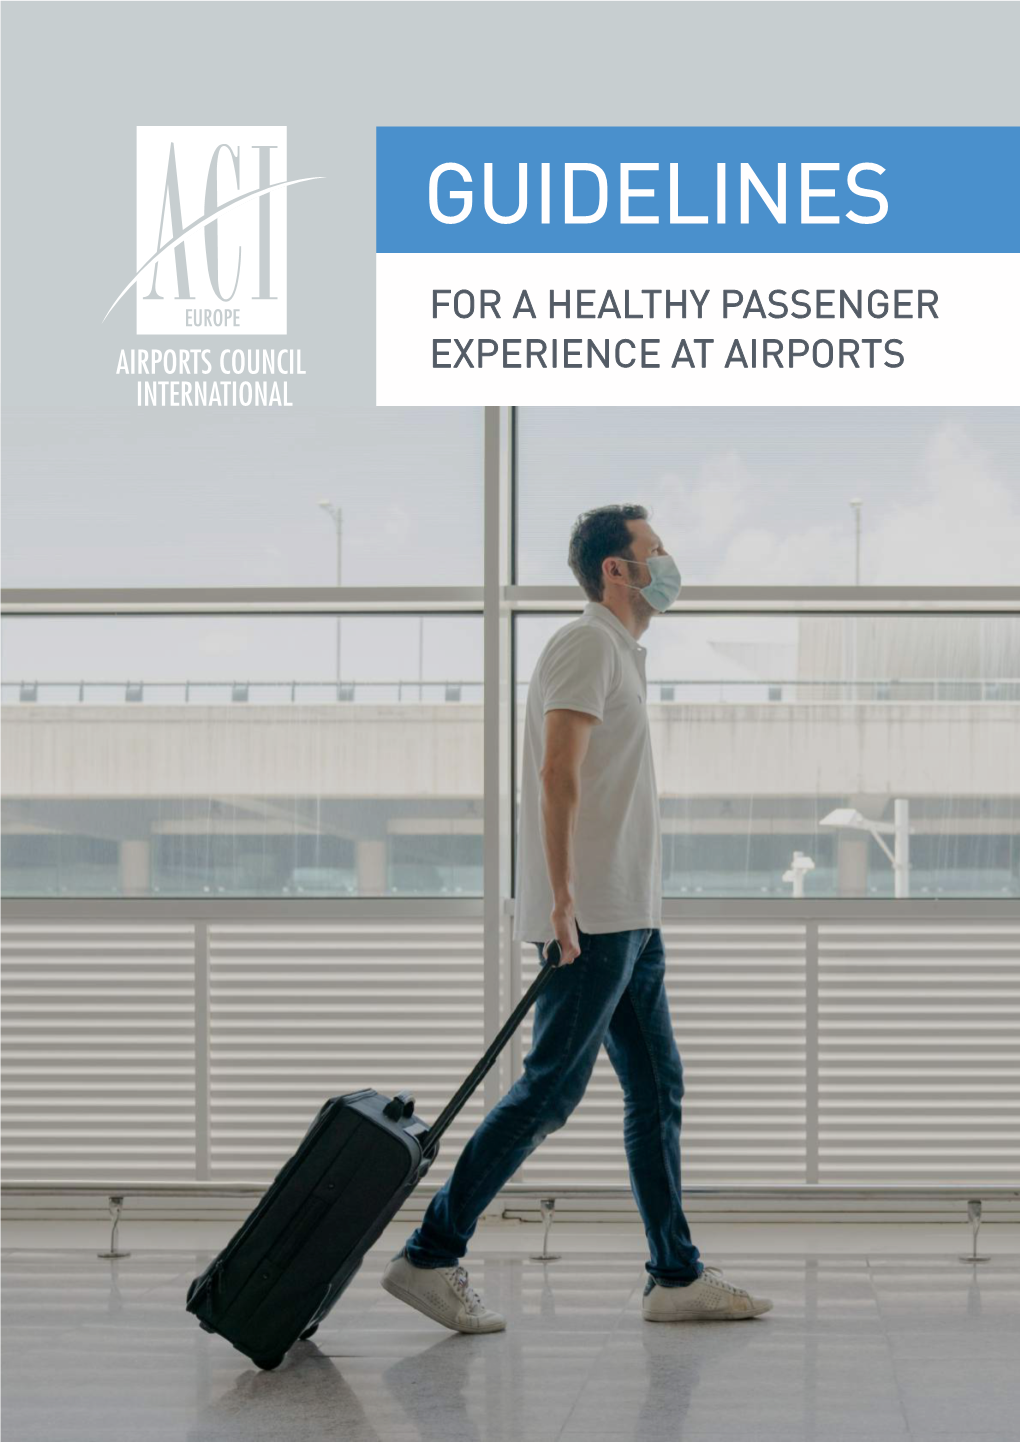 ACI Europe Guidelines for a Healthy Passenger Experience at Airports